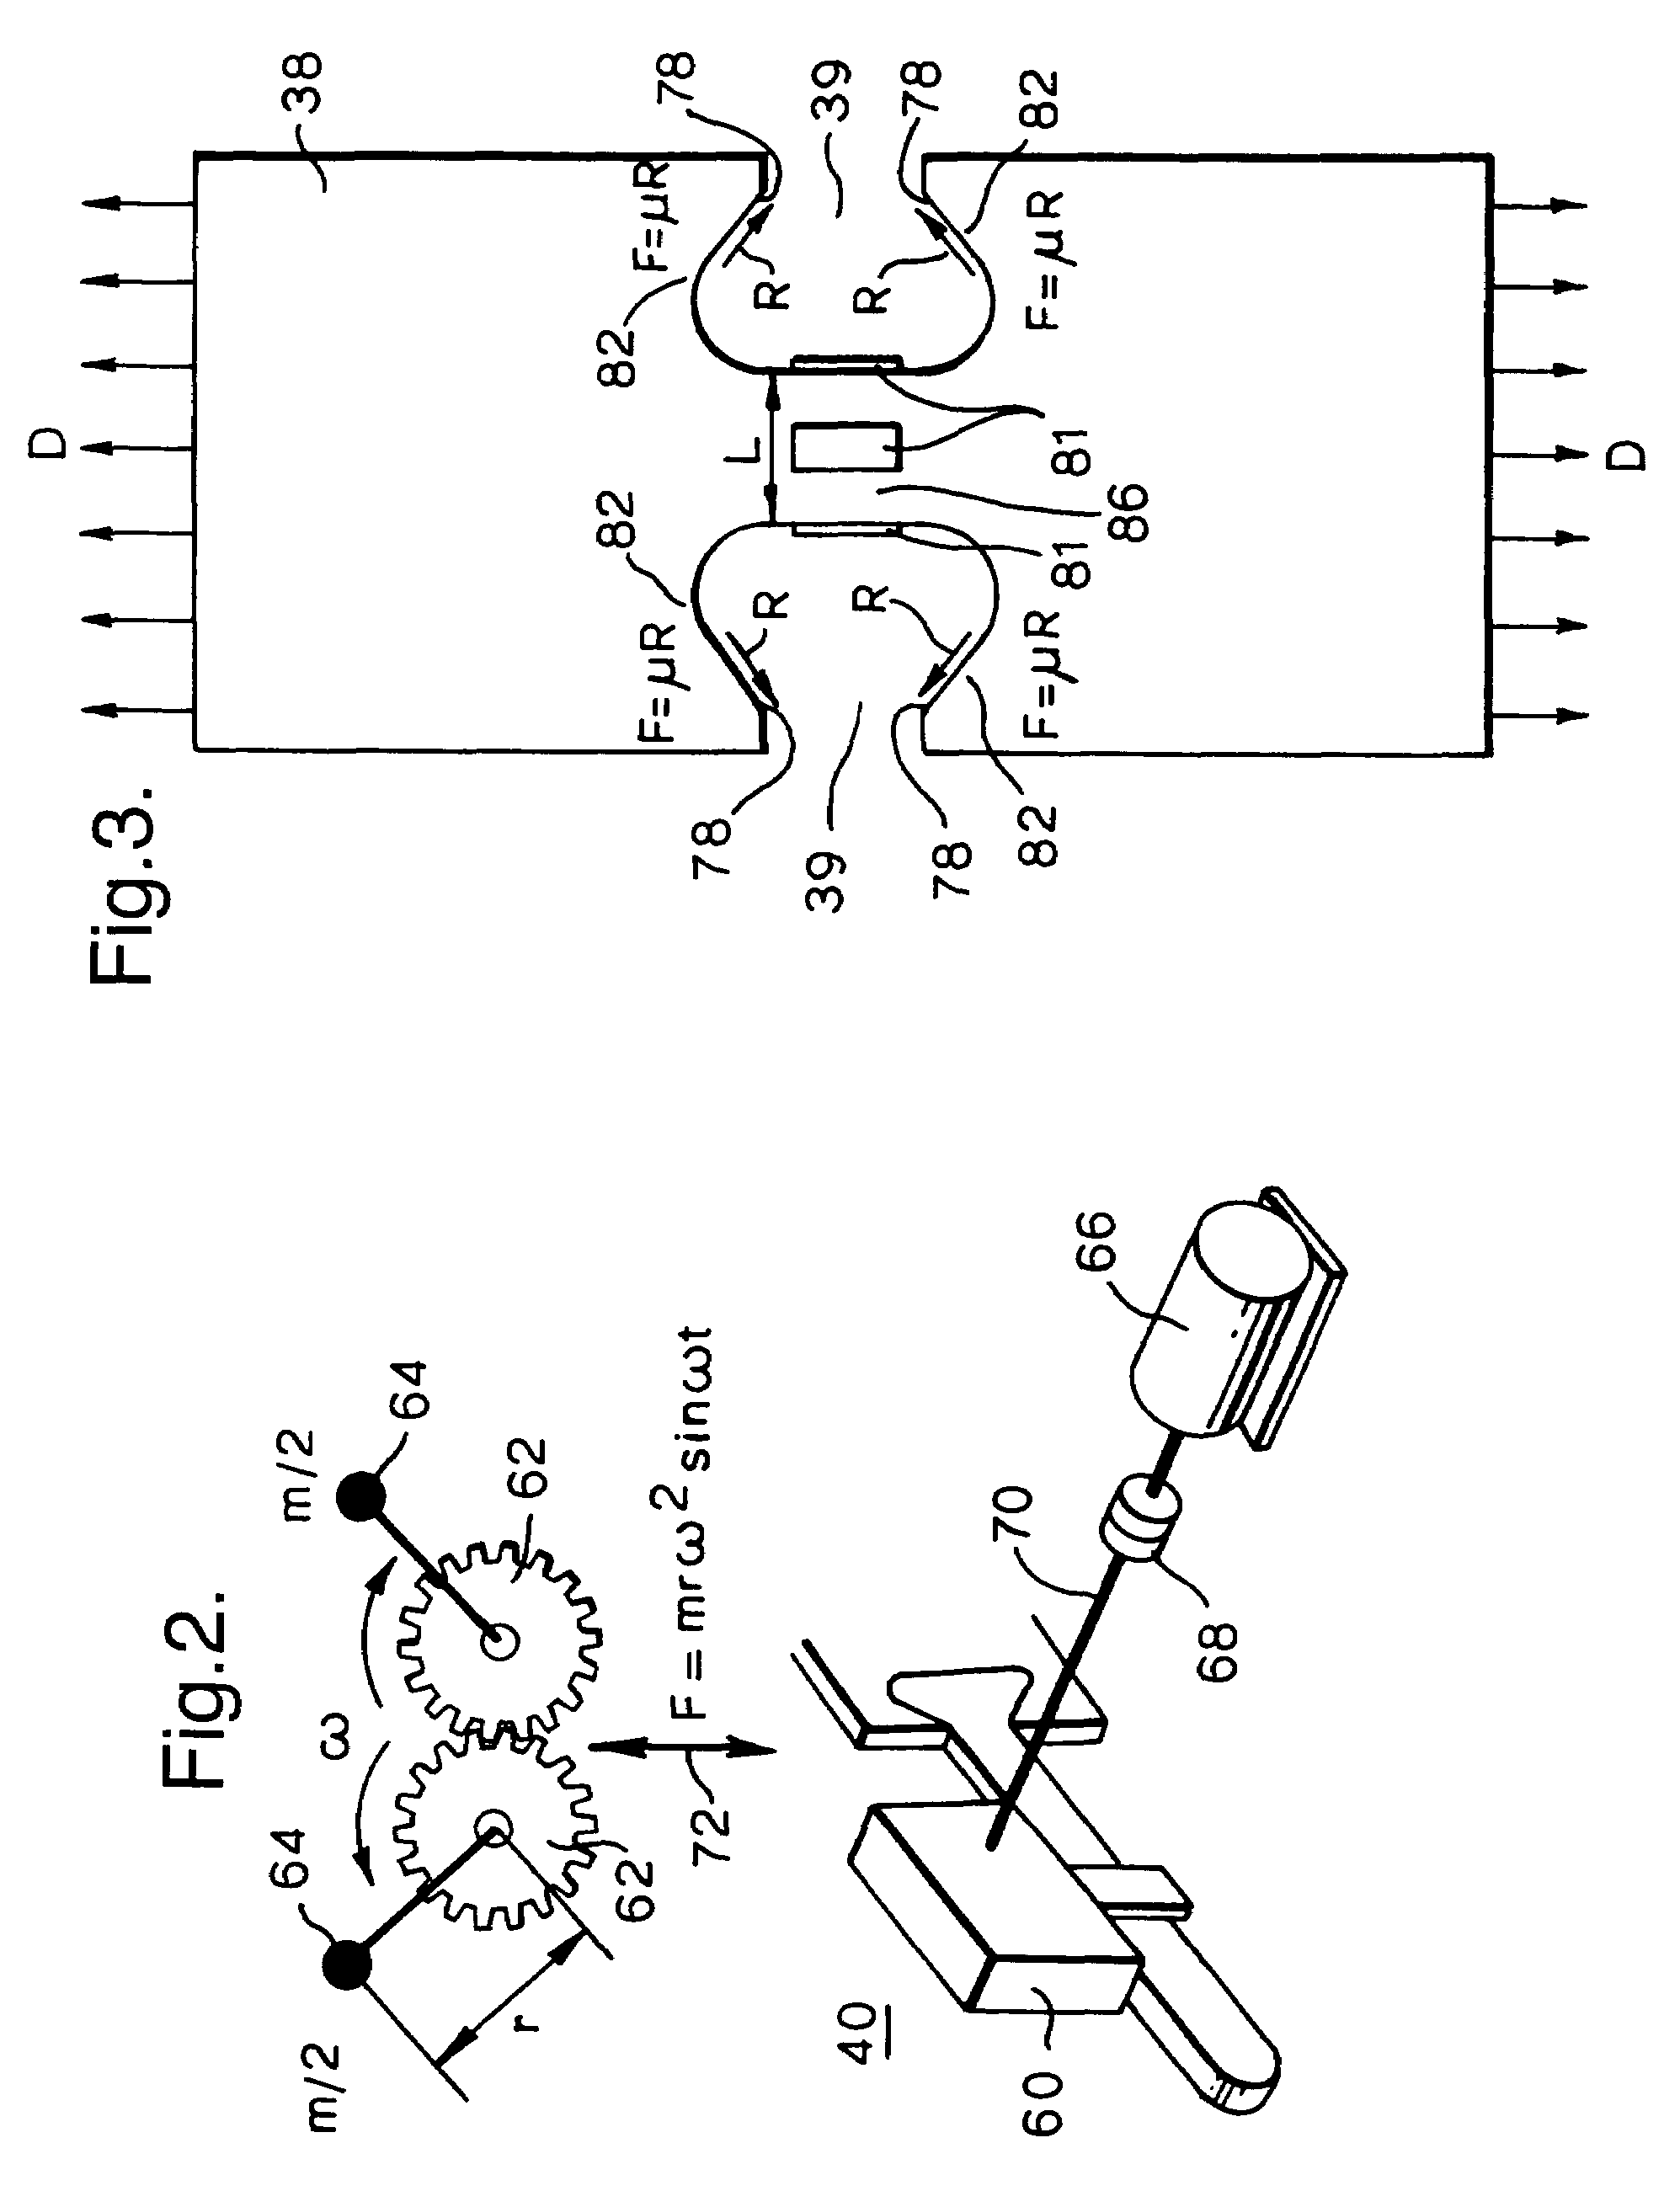 Apparatus and method for fatigue testing